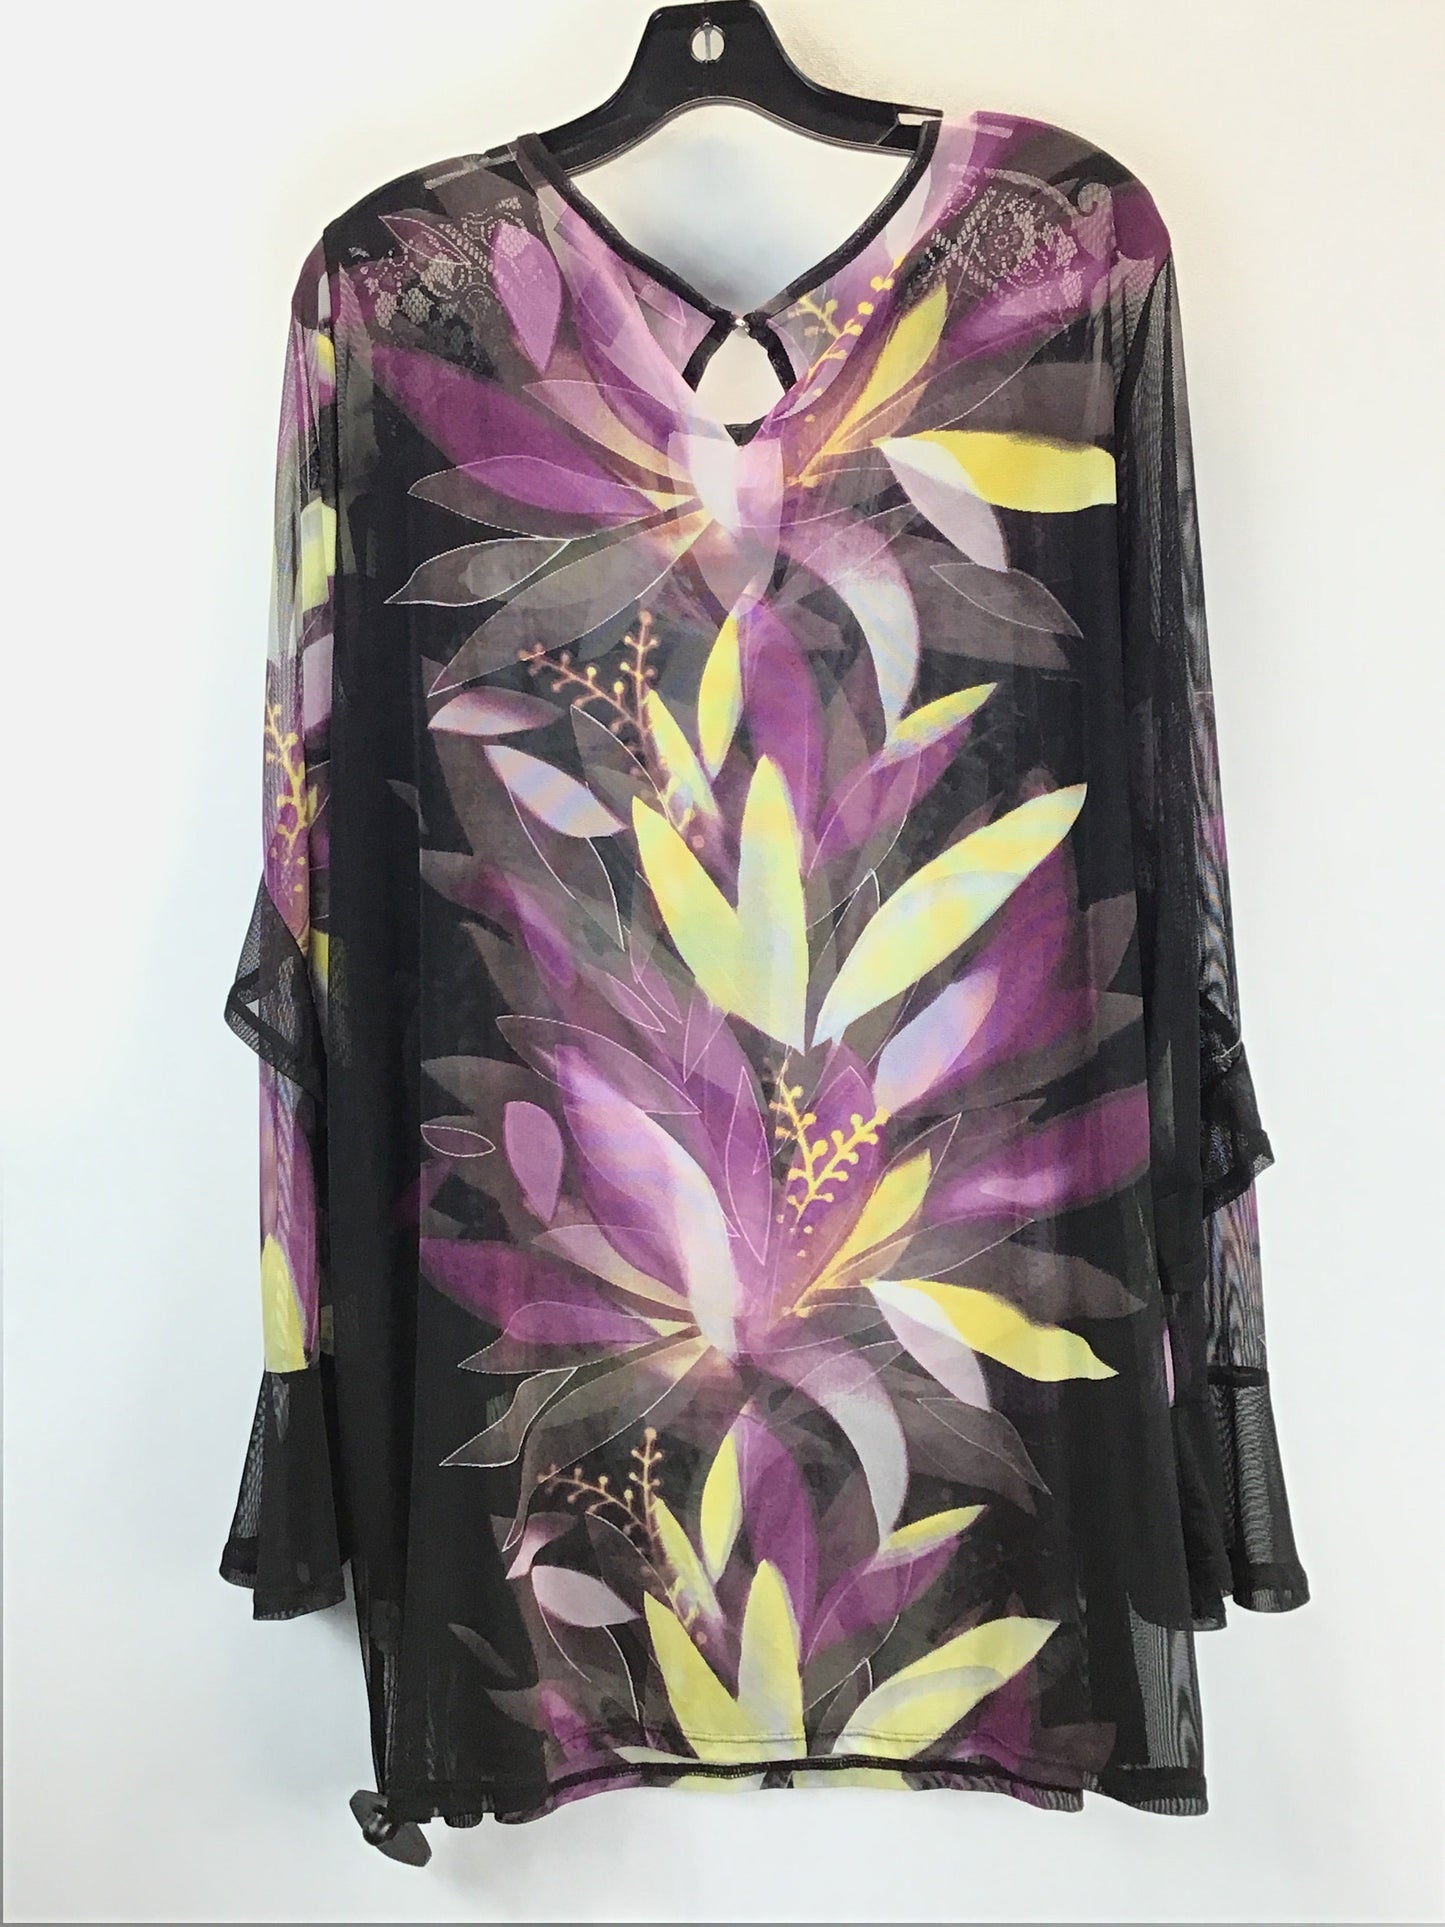 Top Long Sleeve By Ashley Stewart  Size: 22